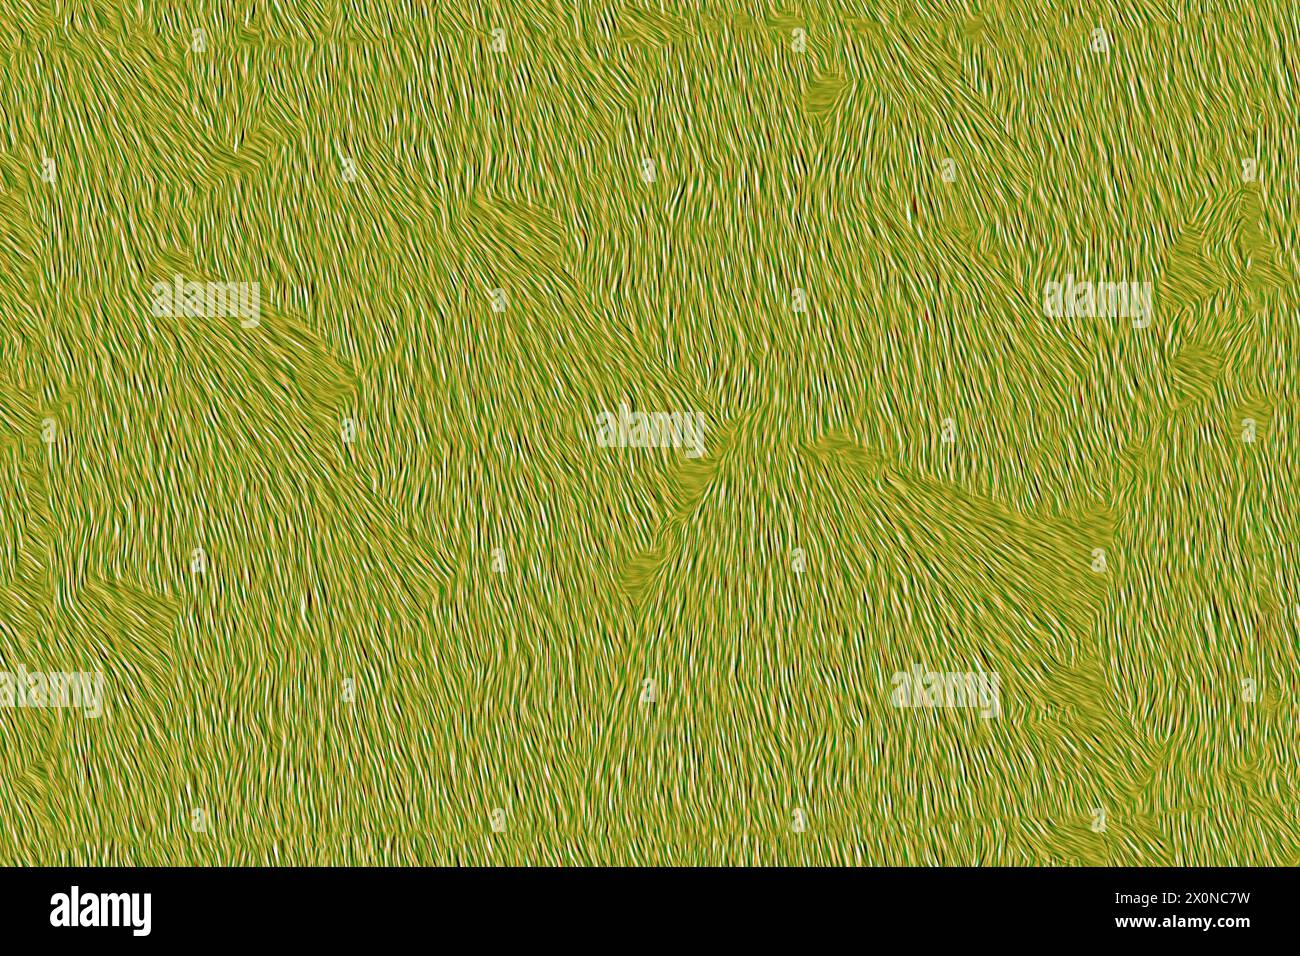 Relief texture of abstract surface for design.The rough surface is yellow-green in color. Stock Photo